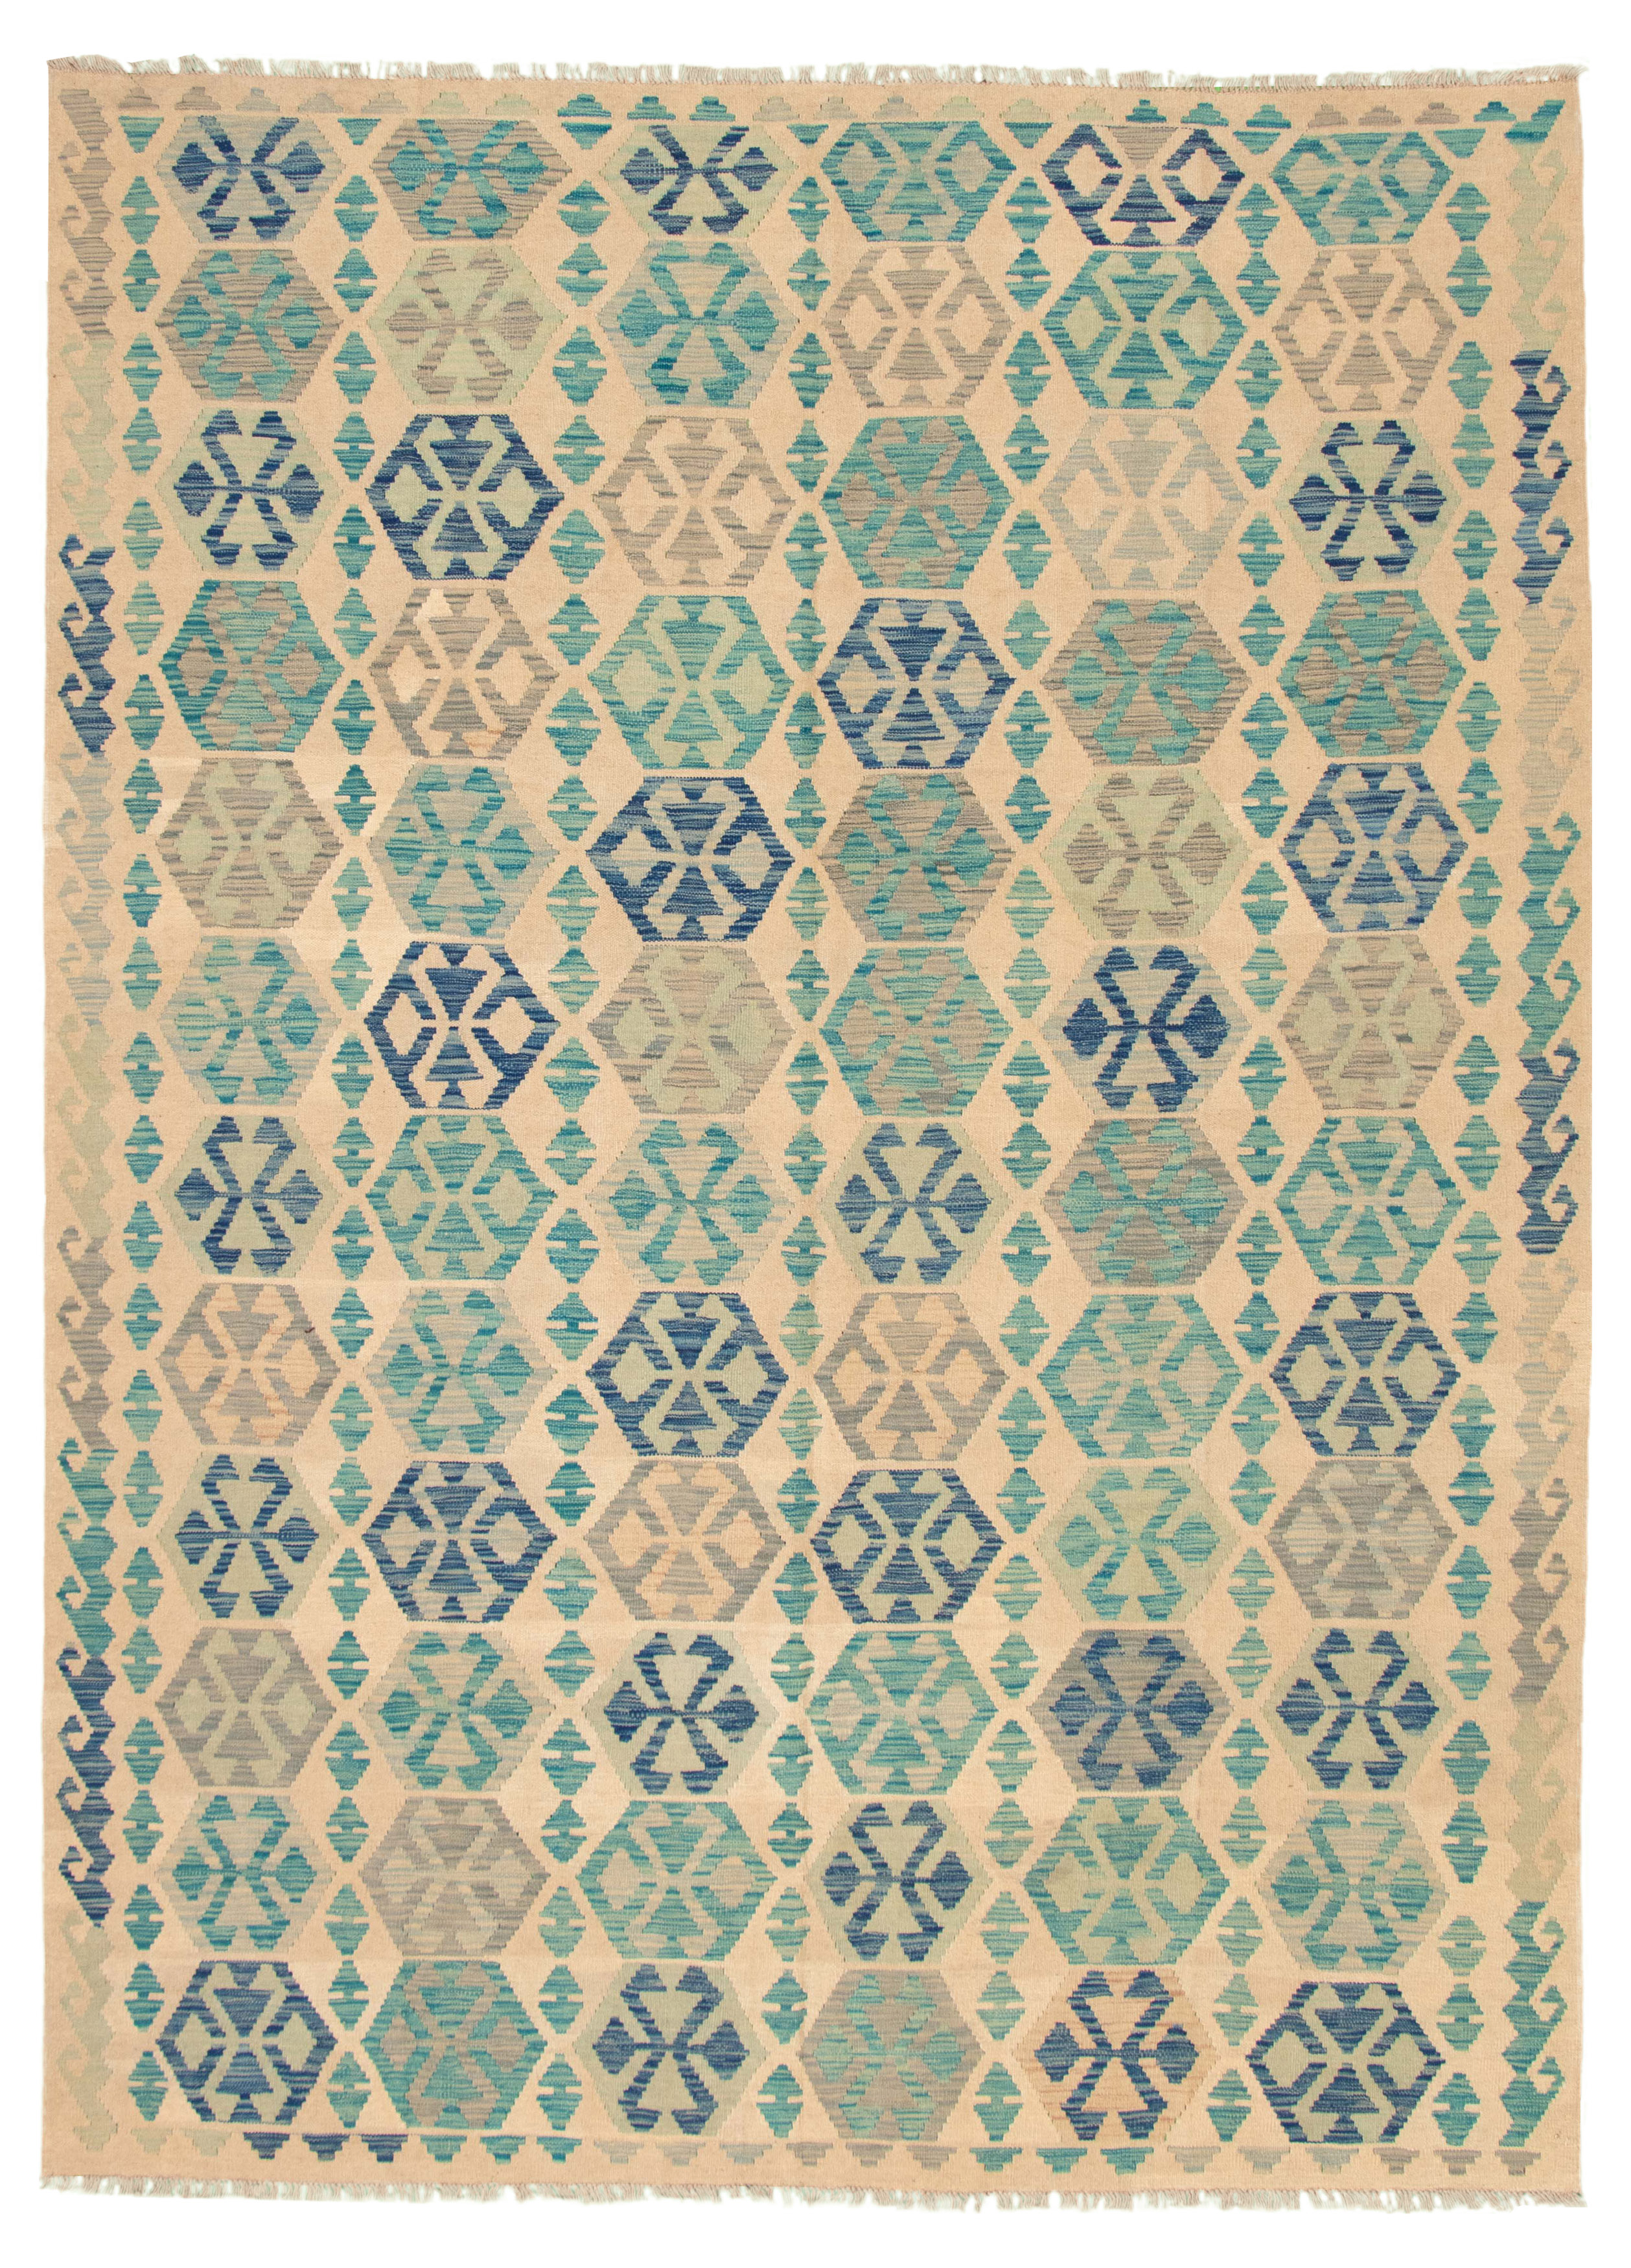 Hand woven Bold and Colorful  Ivory Wool Kilim 8'6" x 11'6" Size: 8'6" x 11'6"  